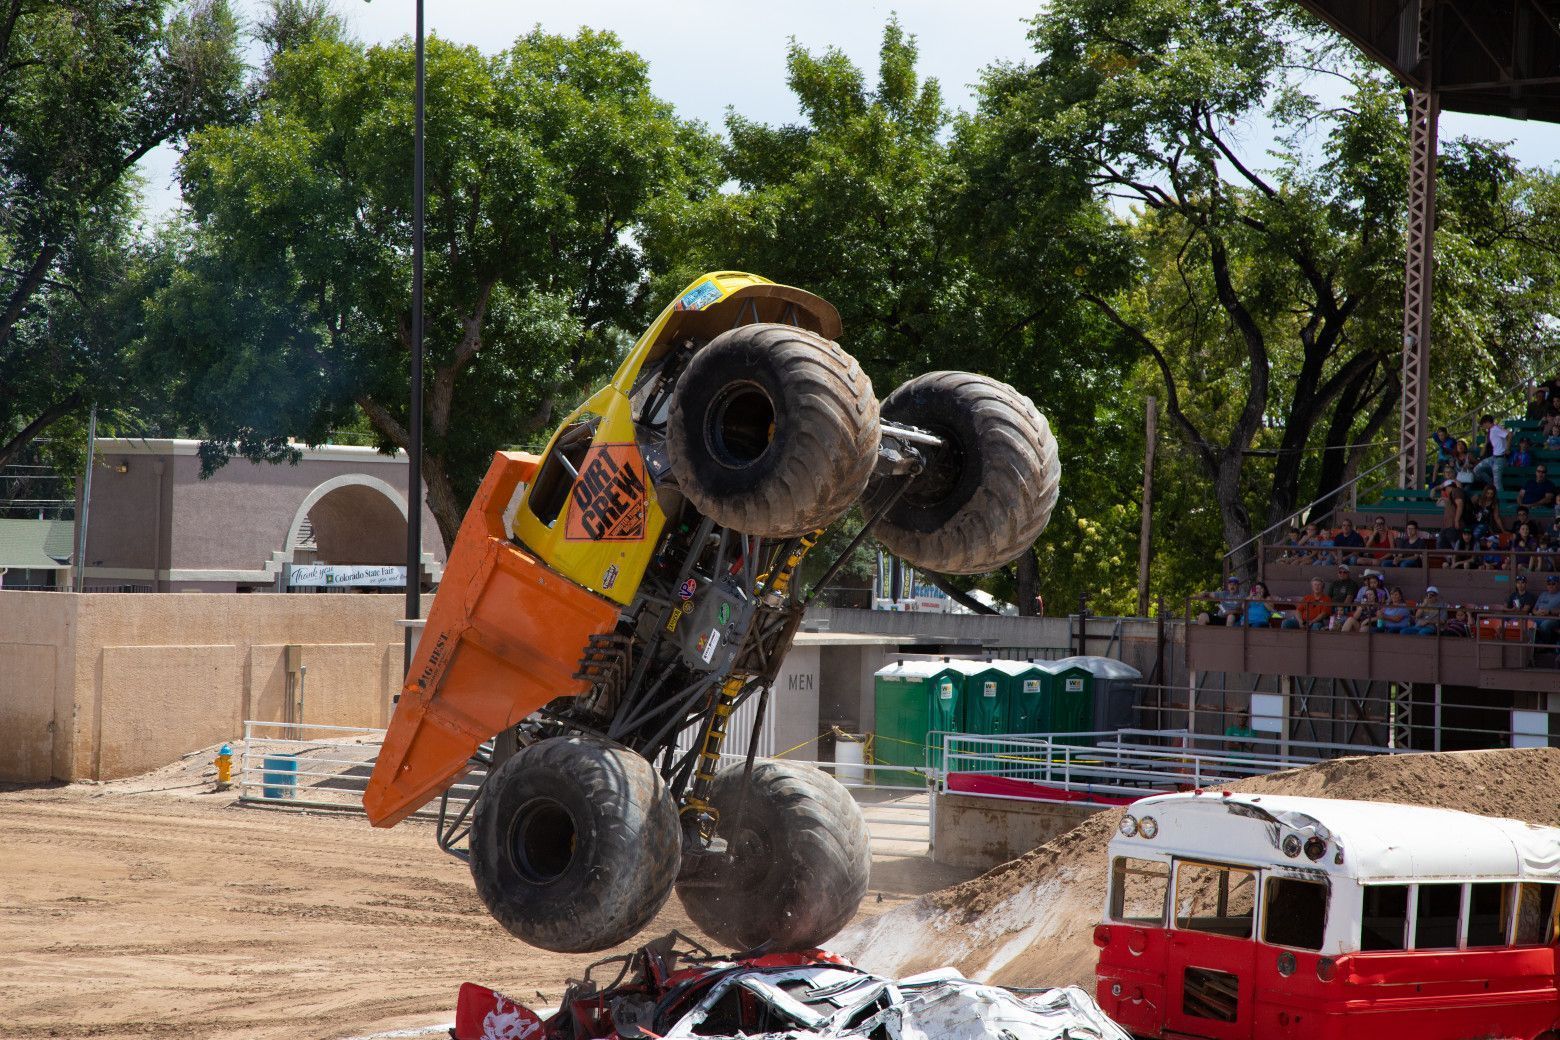 The Dirt Crew monster truck driving high off a ramp and catching some air at the Colorado State Fair